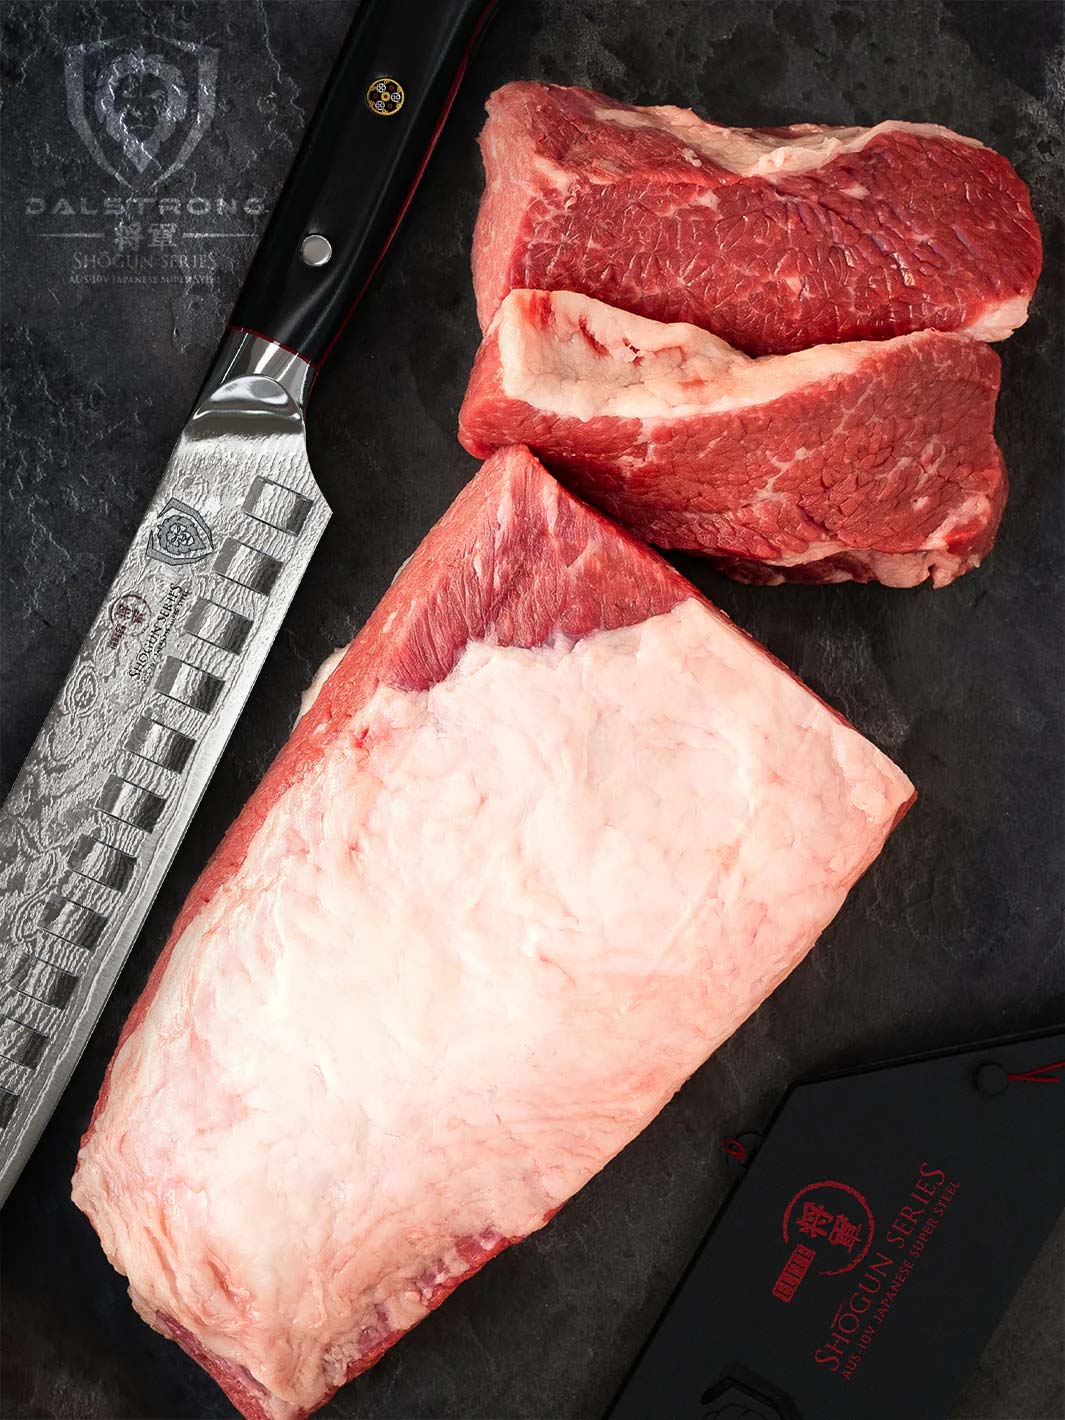 12 Cimeter Prodigy Series Meat Breaking and Slicing knife by Ergo Chef